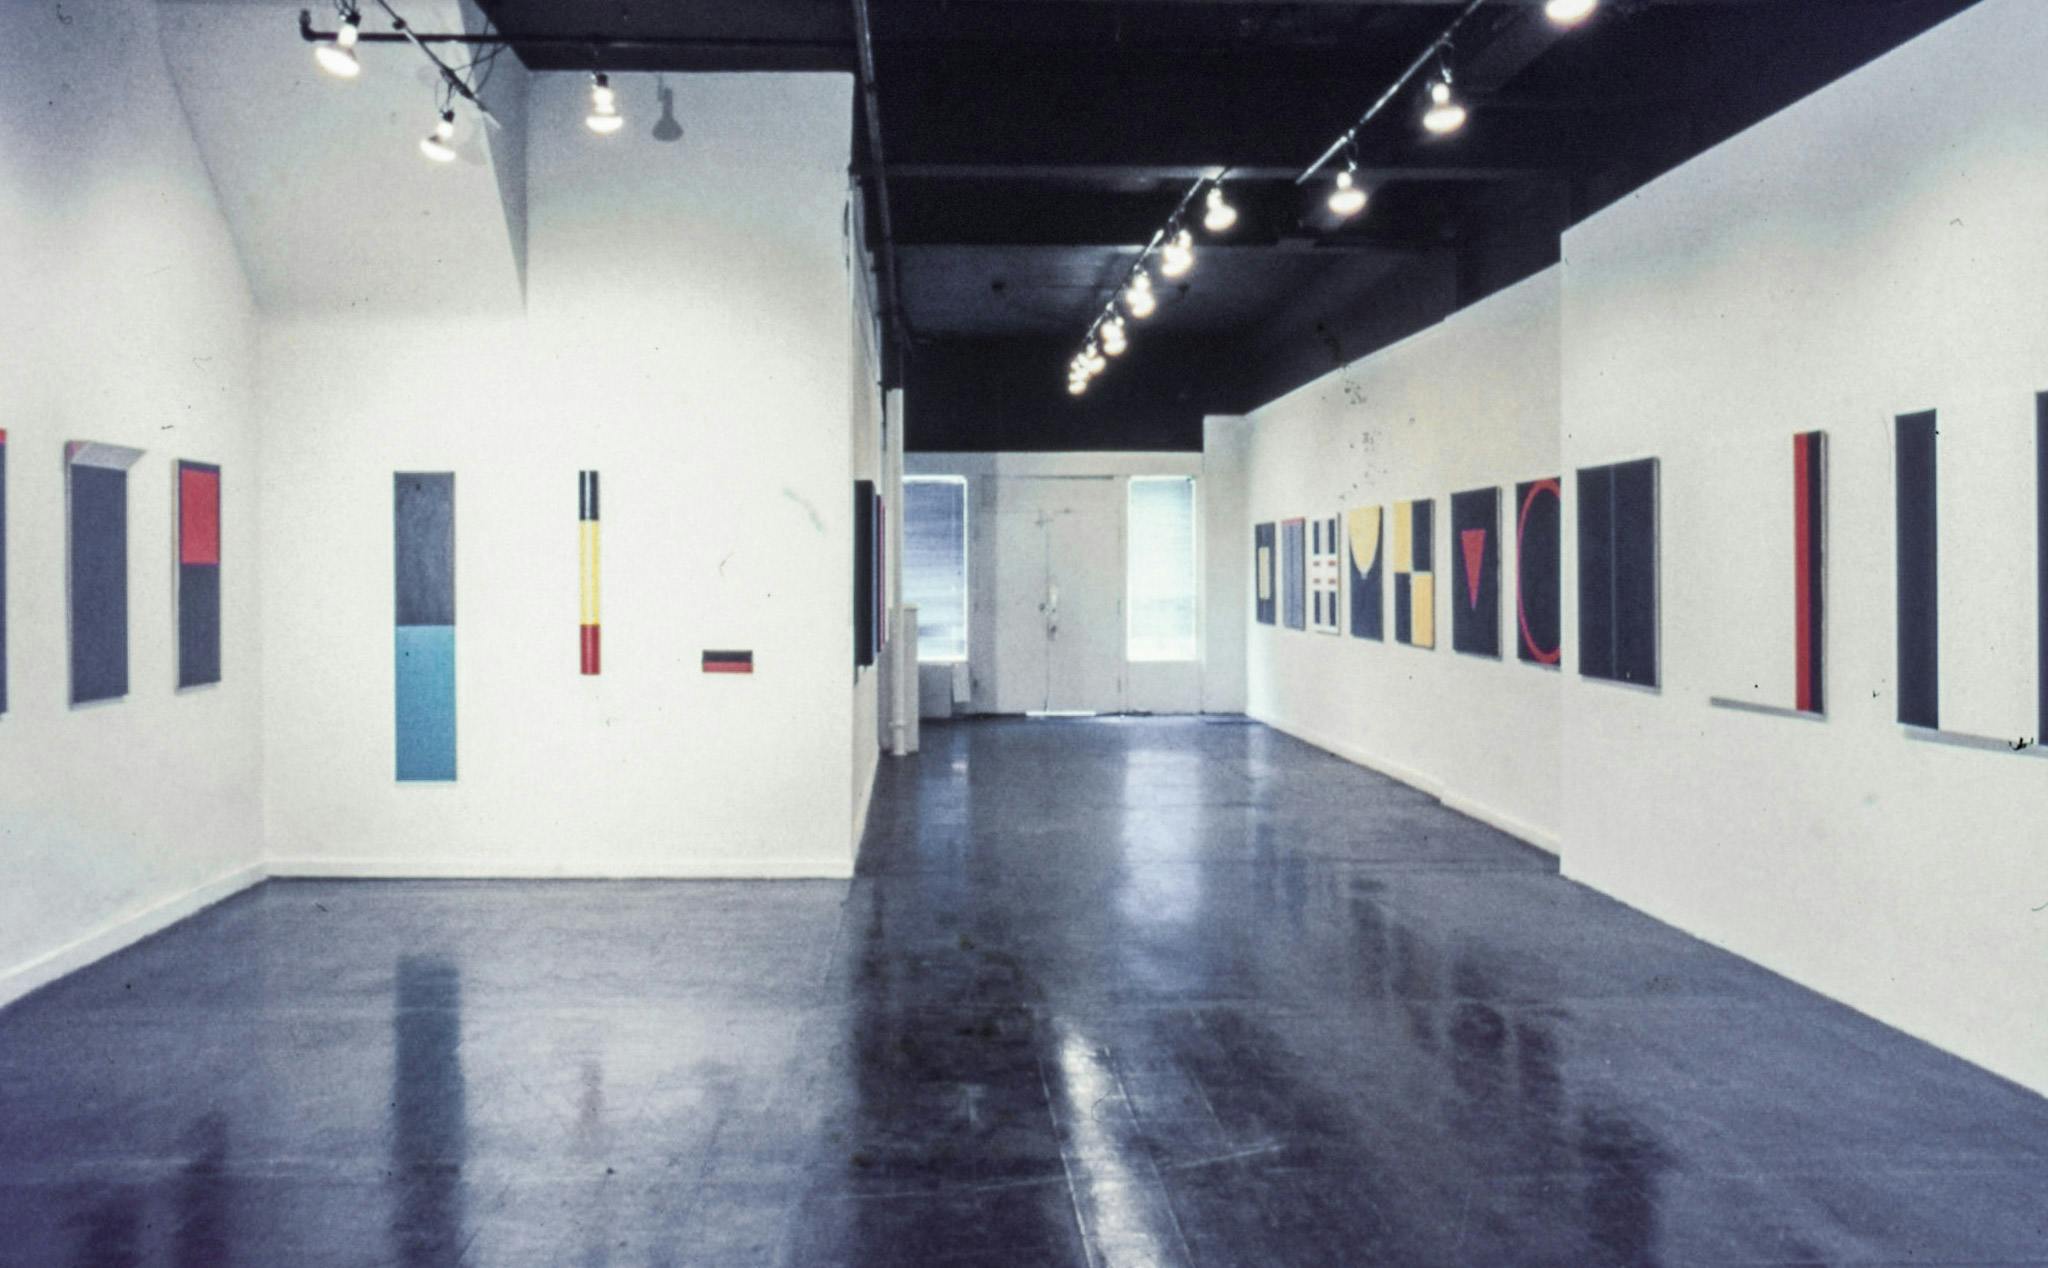 Several abstract paintings line the walls of a gallery. Most of the paintings are on square canvases, and show geometric shapes in blue, yellow, white, black, and red.